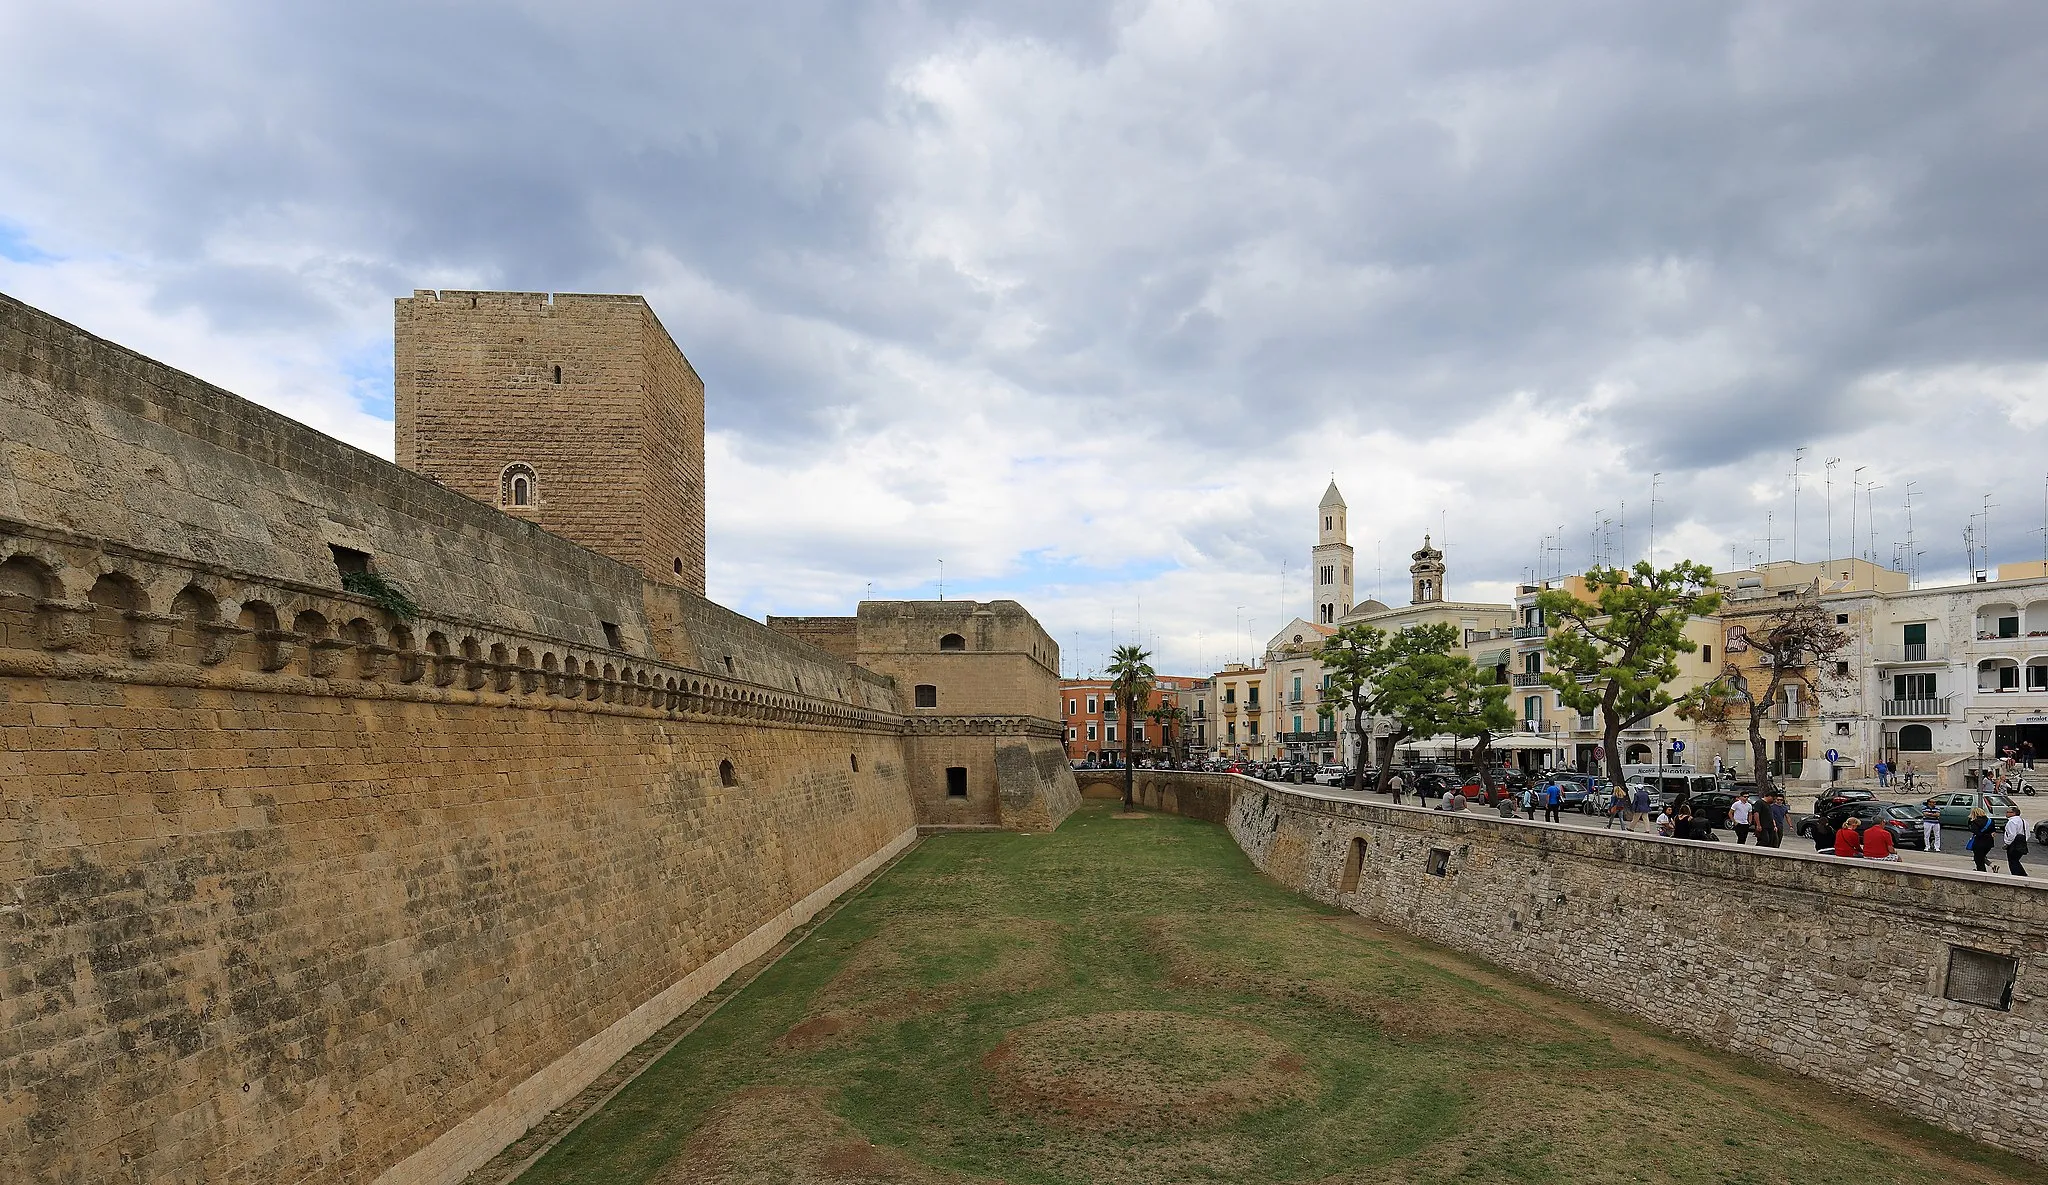 Photo showing: The Old Town of Bari as seen from the Castello Svevo.